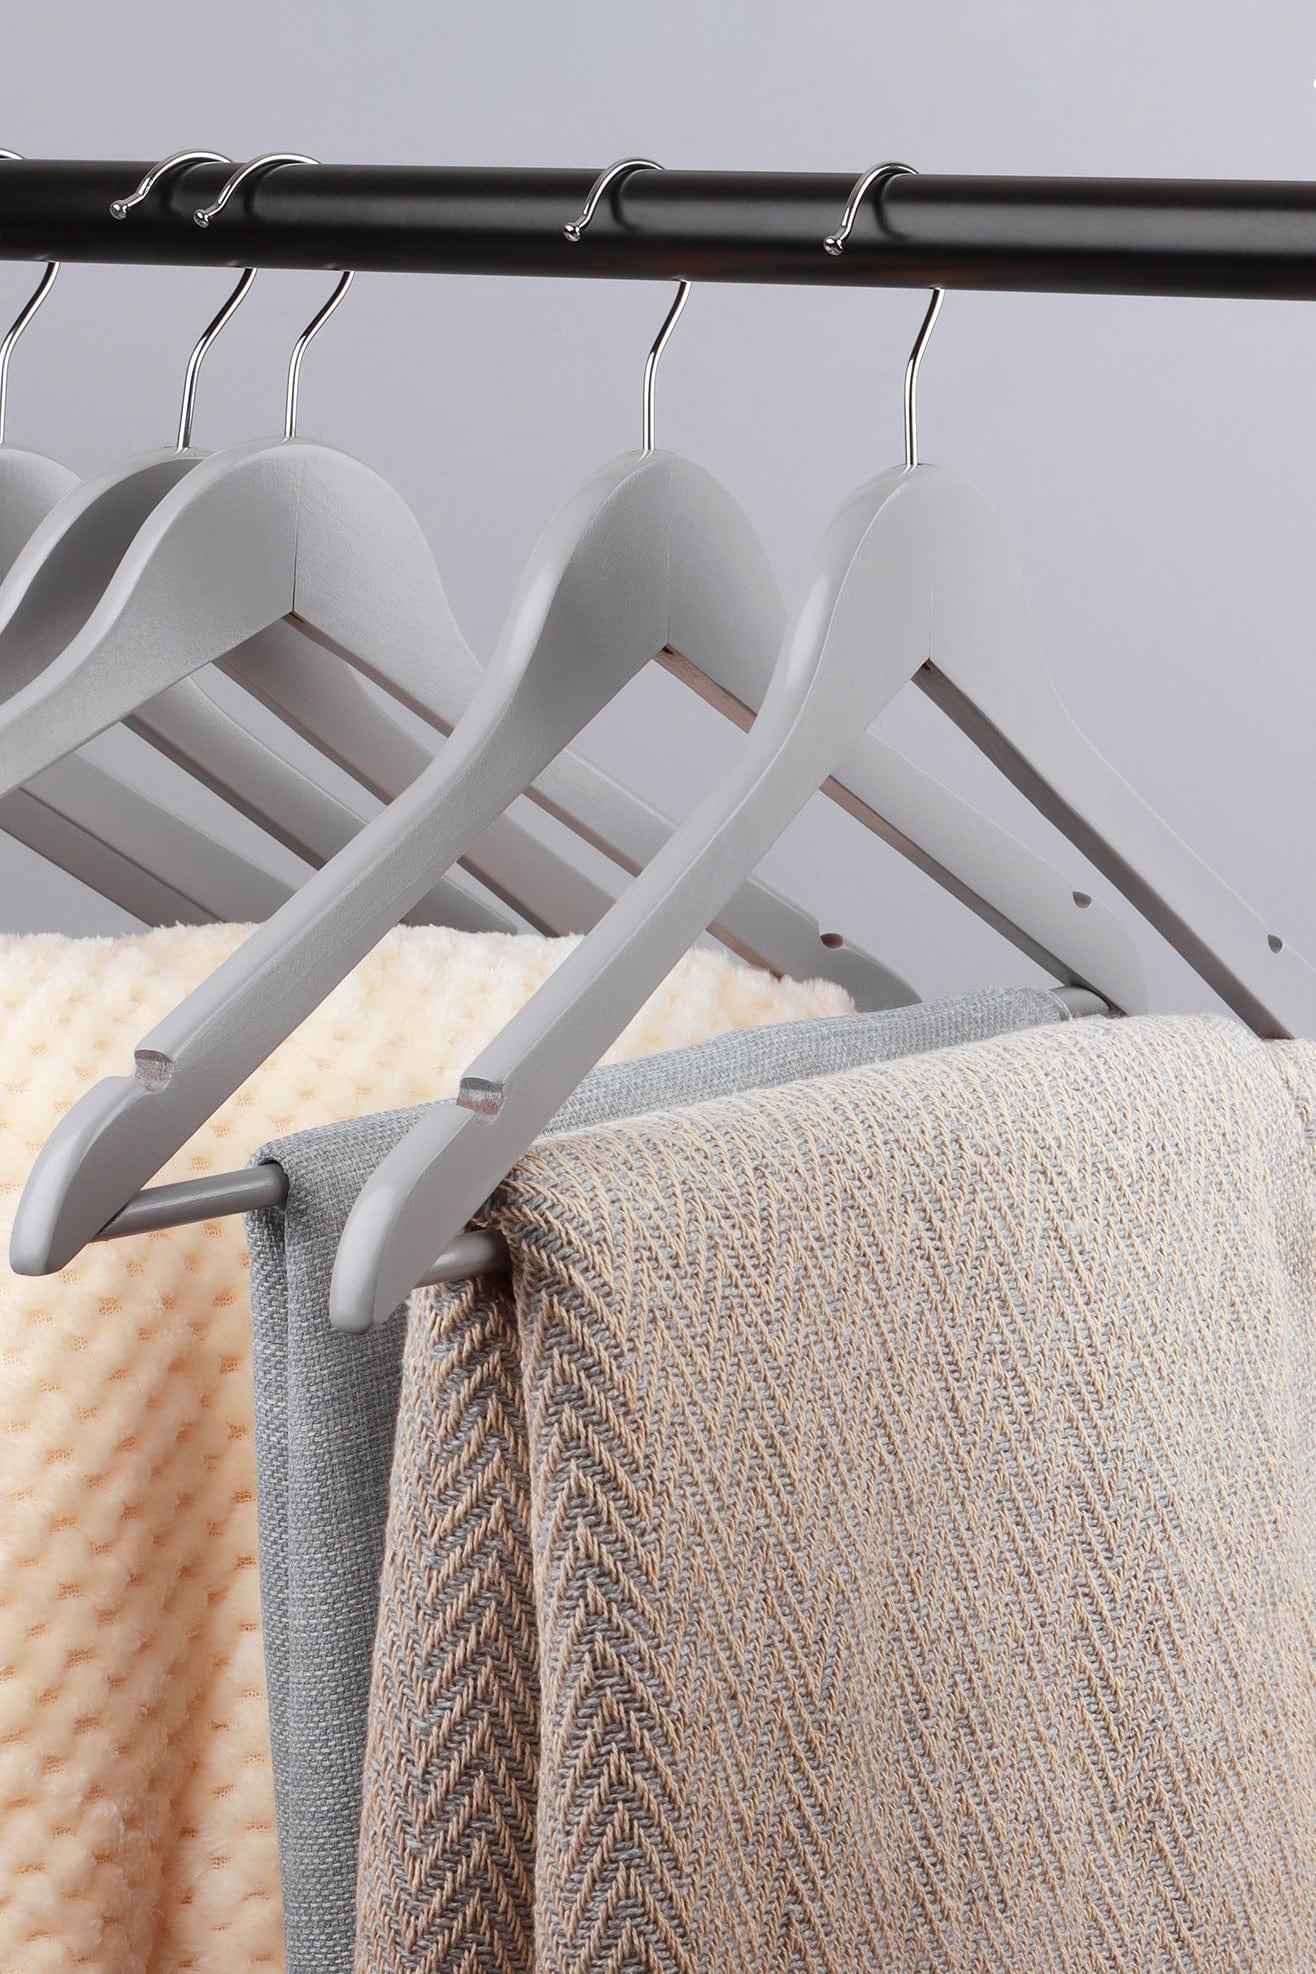 G Decor Hangers Grey Set of 10 Set of 10 Wooden Notched Chrome Hook Clothes Hangers